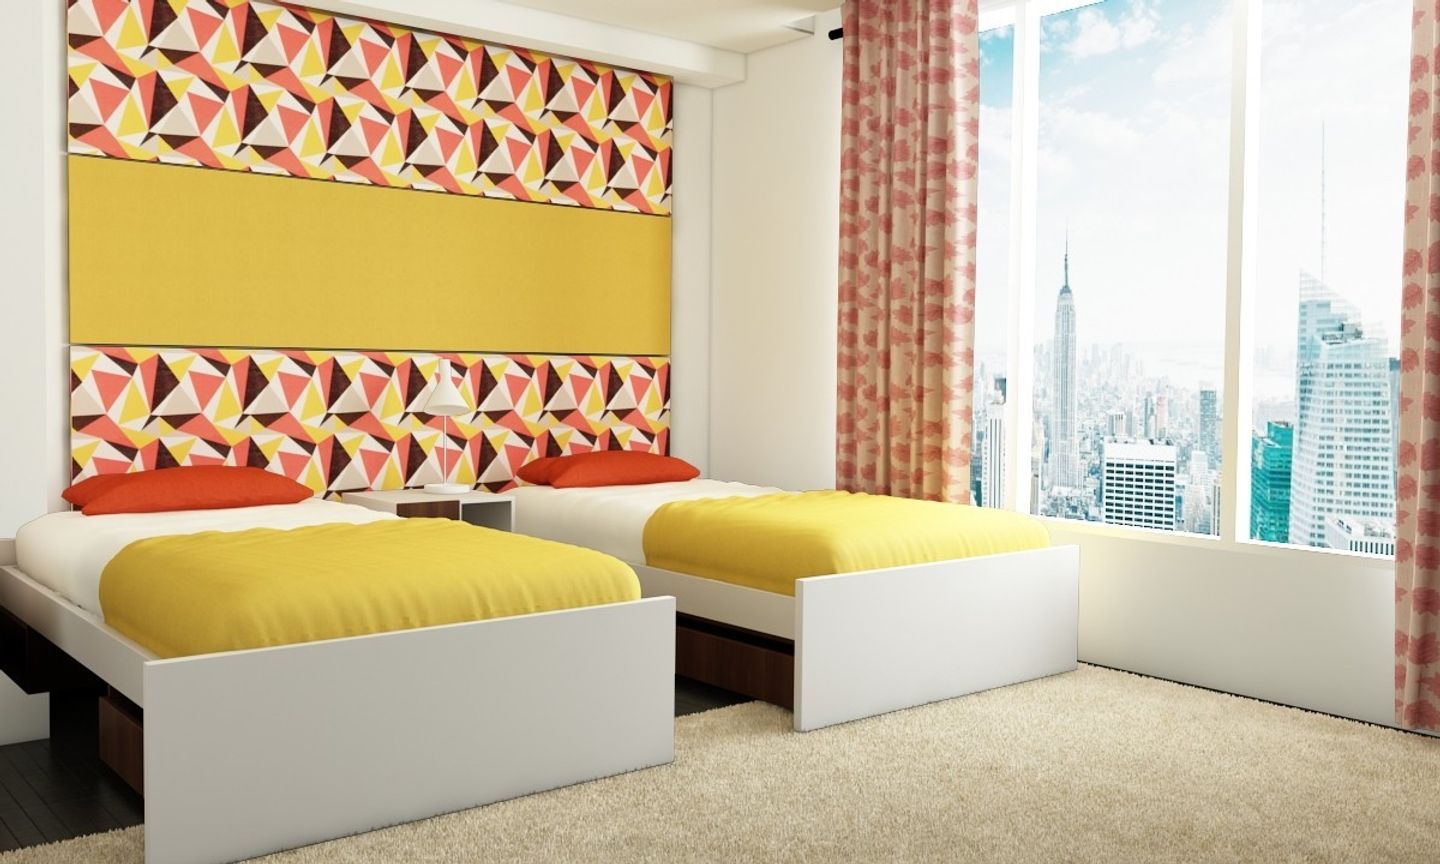 Contemporary Yellow Themed Kid's Room Design With Wallpaper